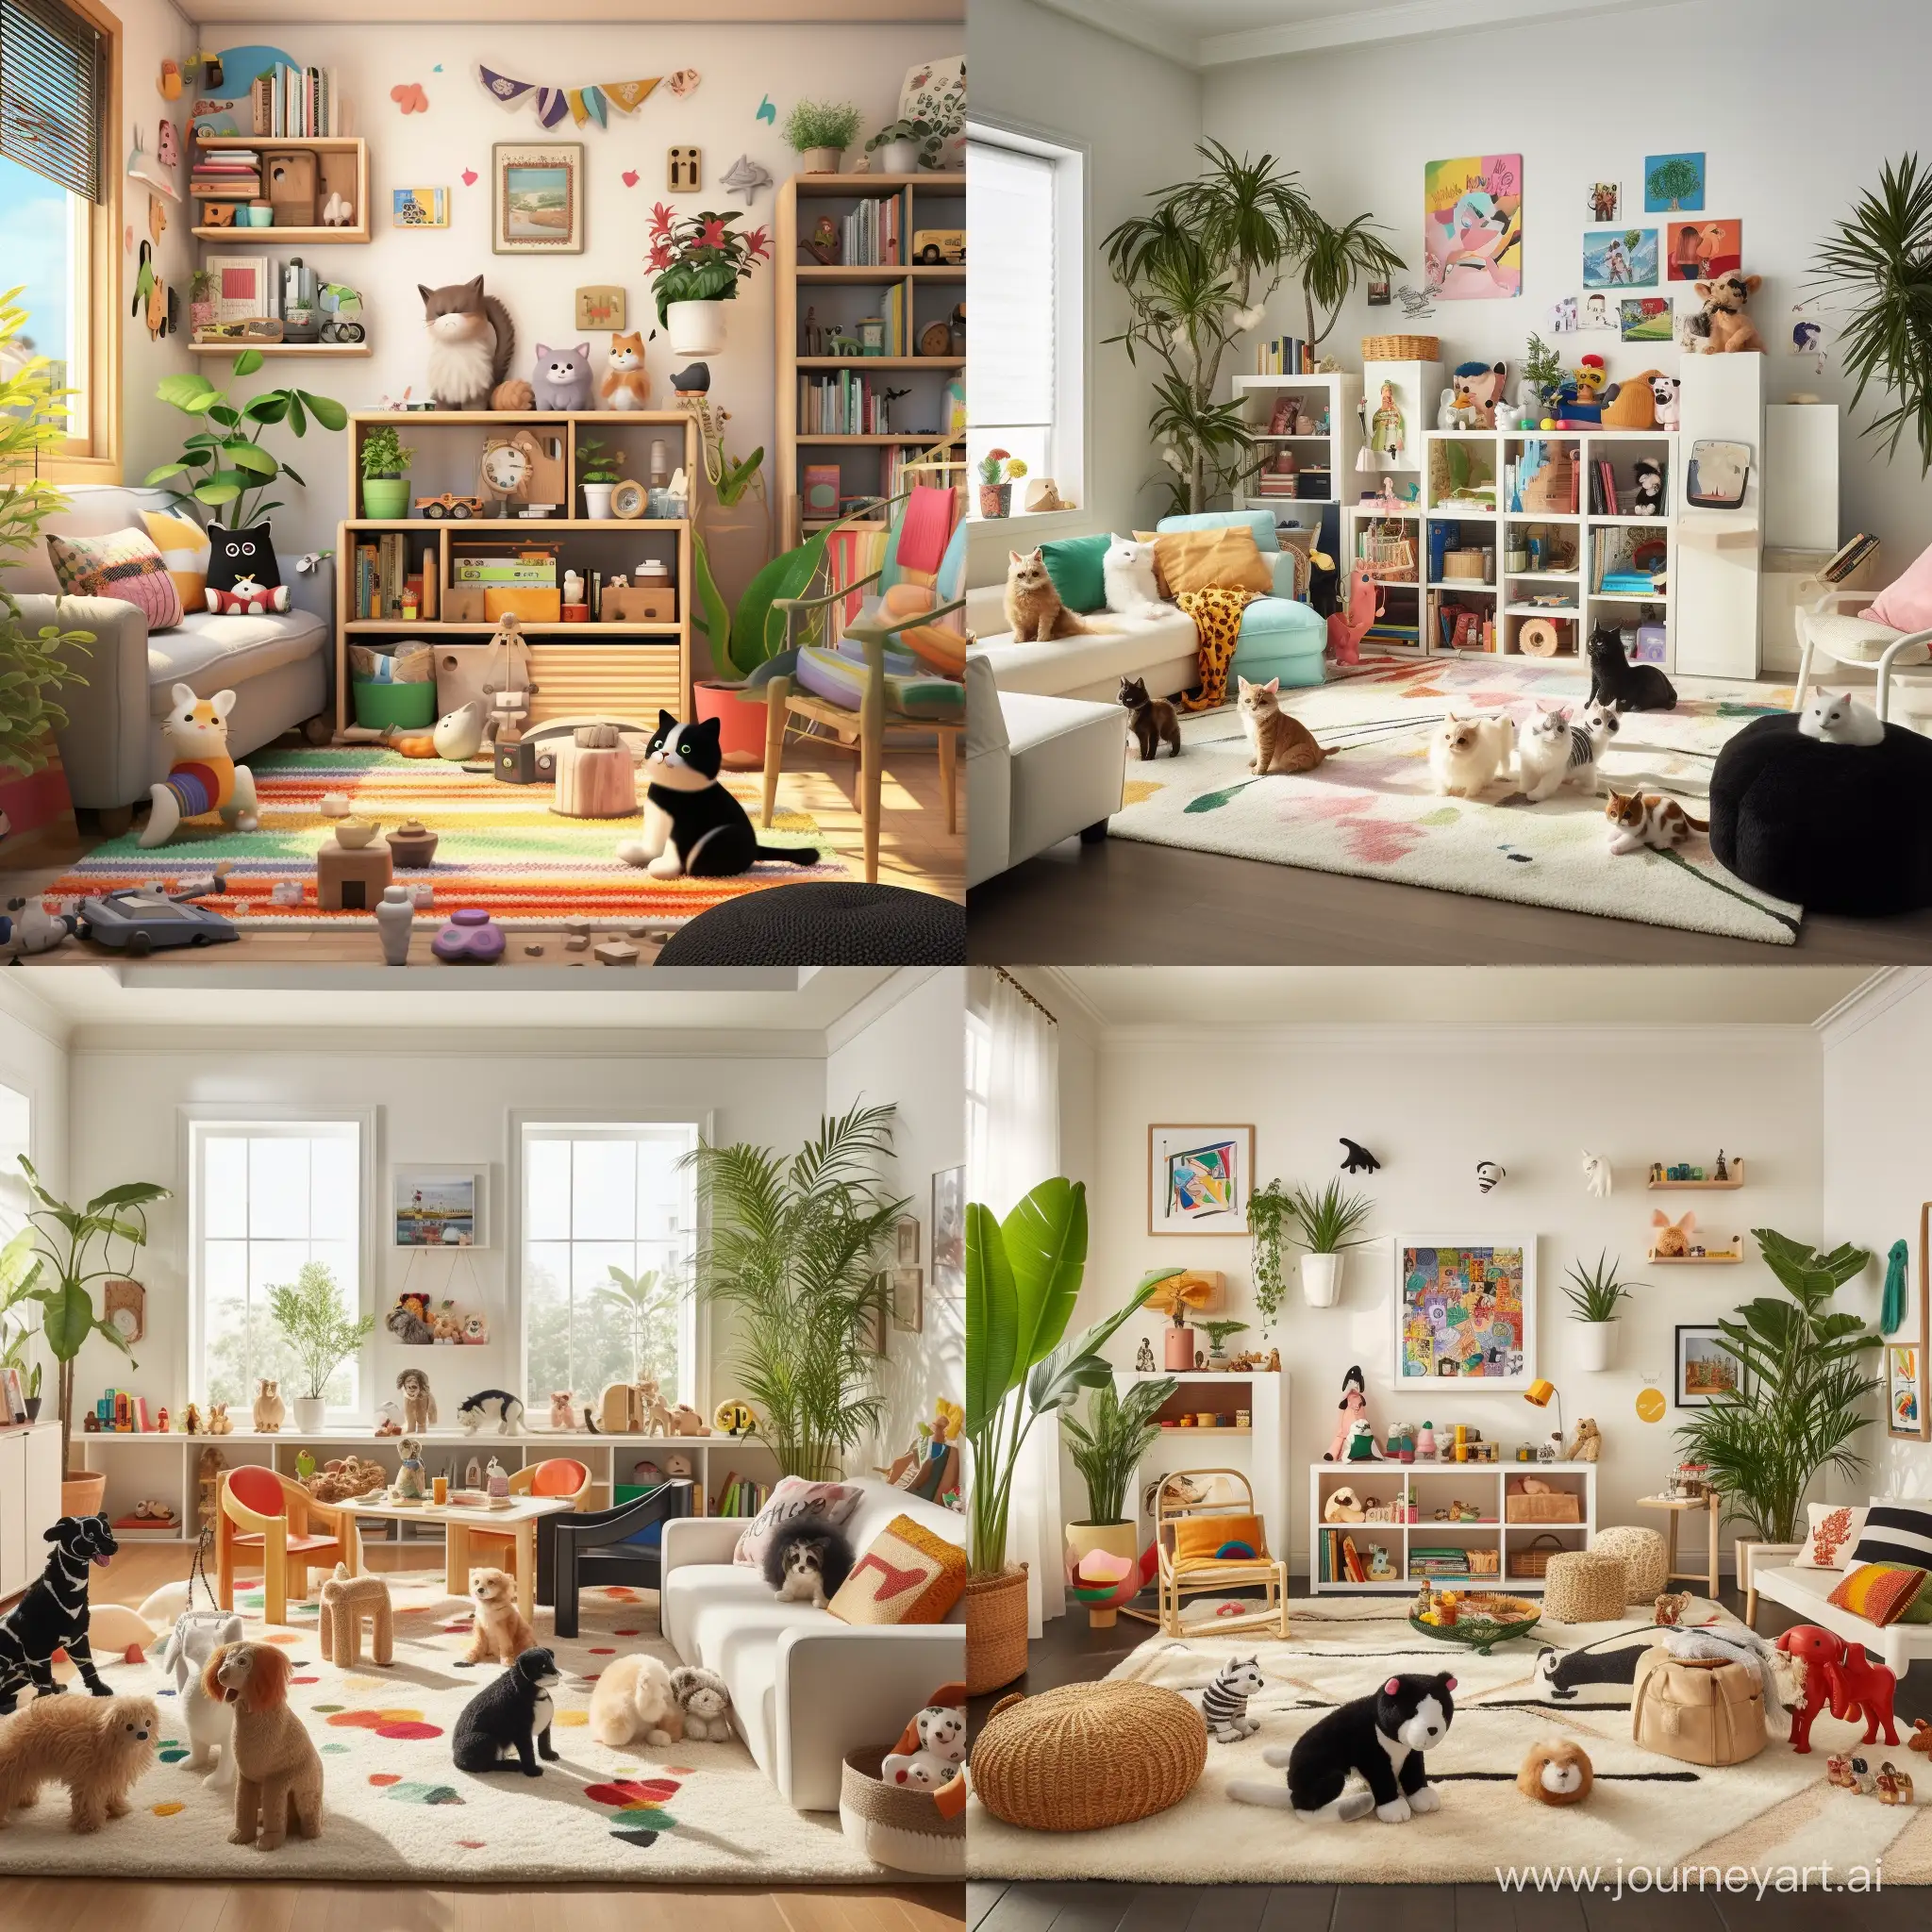 Harmonious-Childrens-Playroom-with-Adorable-Pets-and-Vibrant-Toys